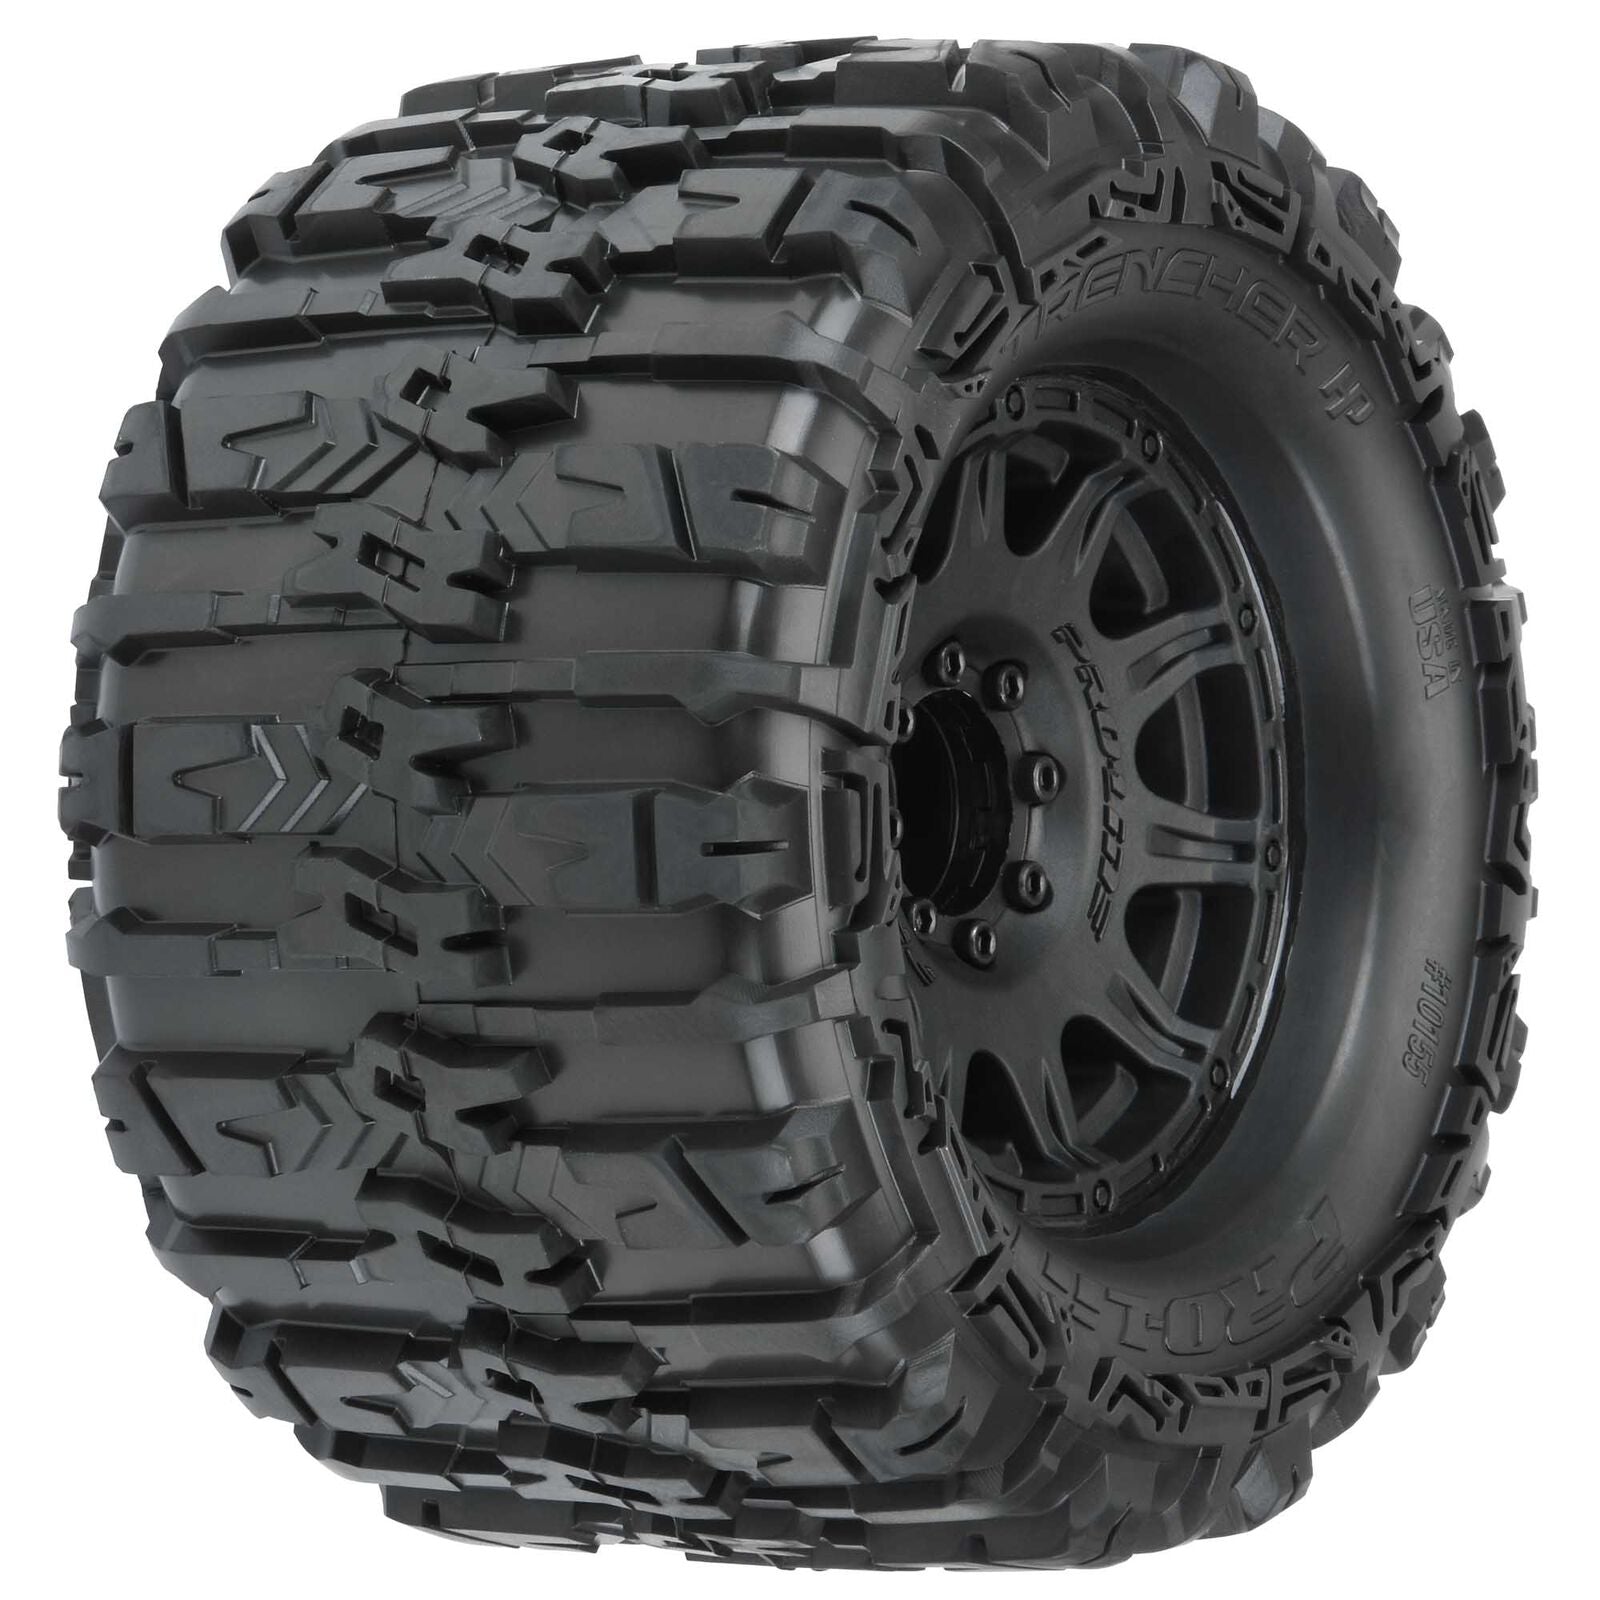 Pro-Line Trencher HP Belted 3.8" Pre-Mounted w/Raid Wheels Monster Truck Tires (2)